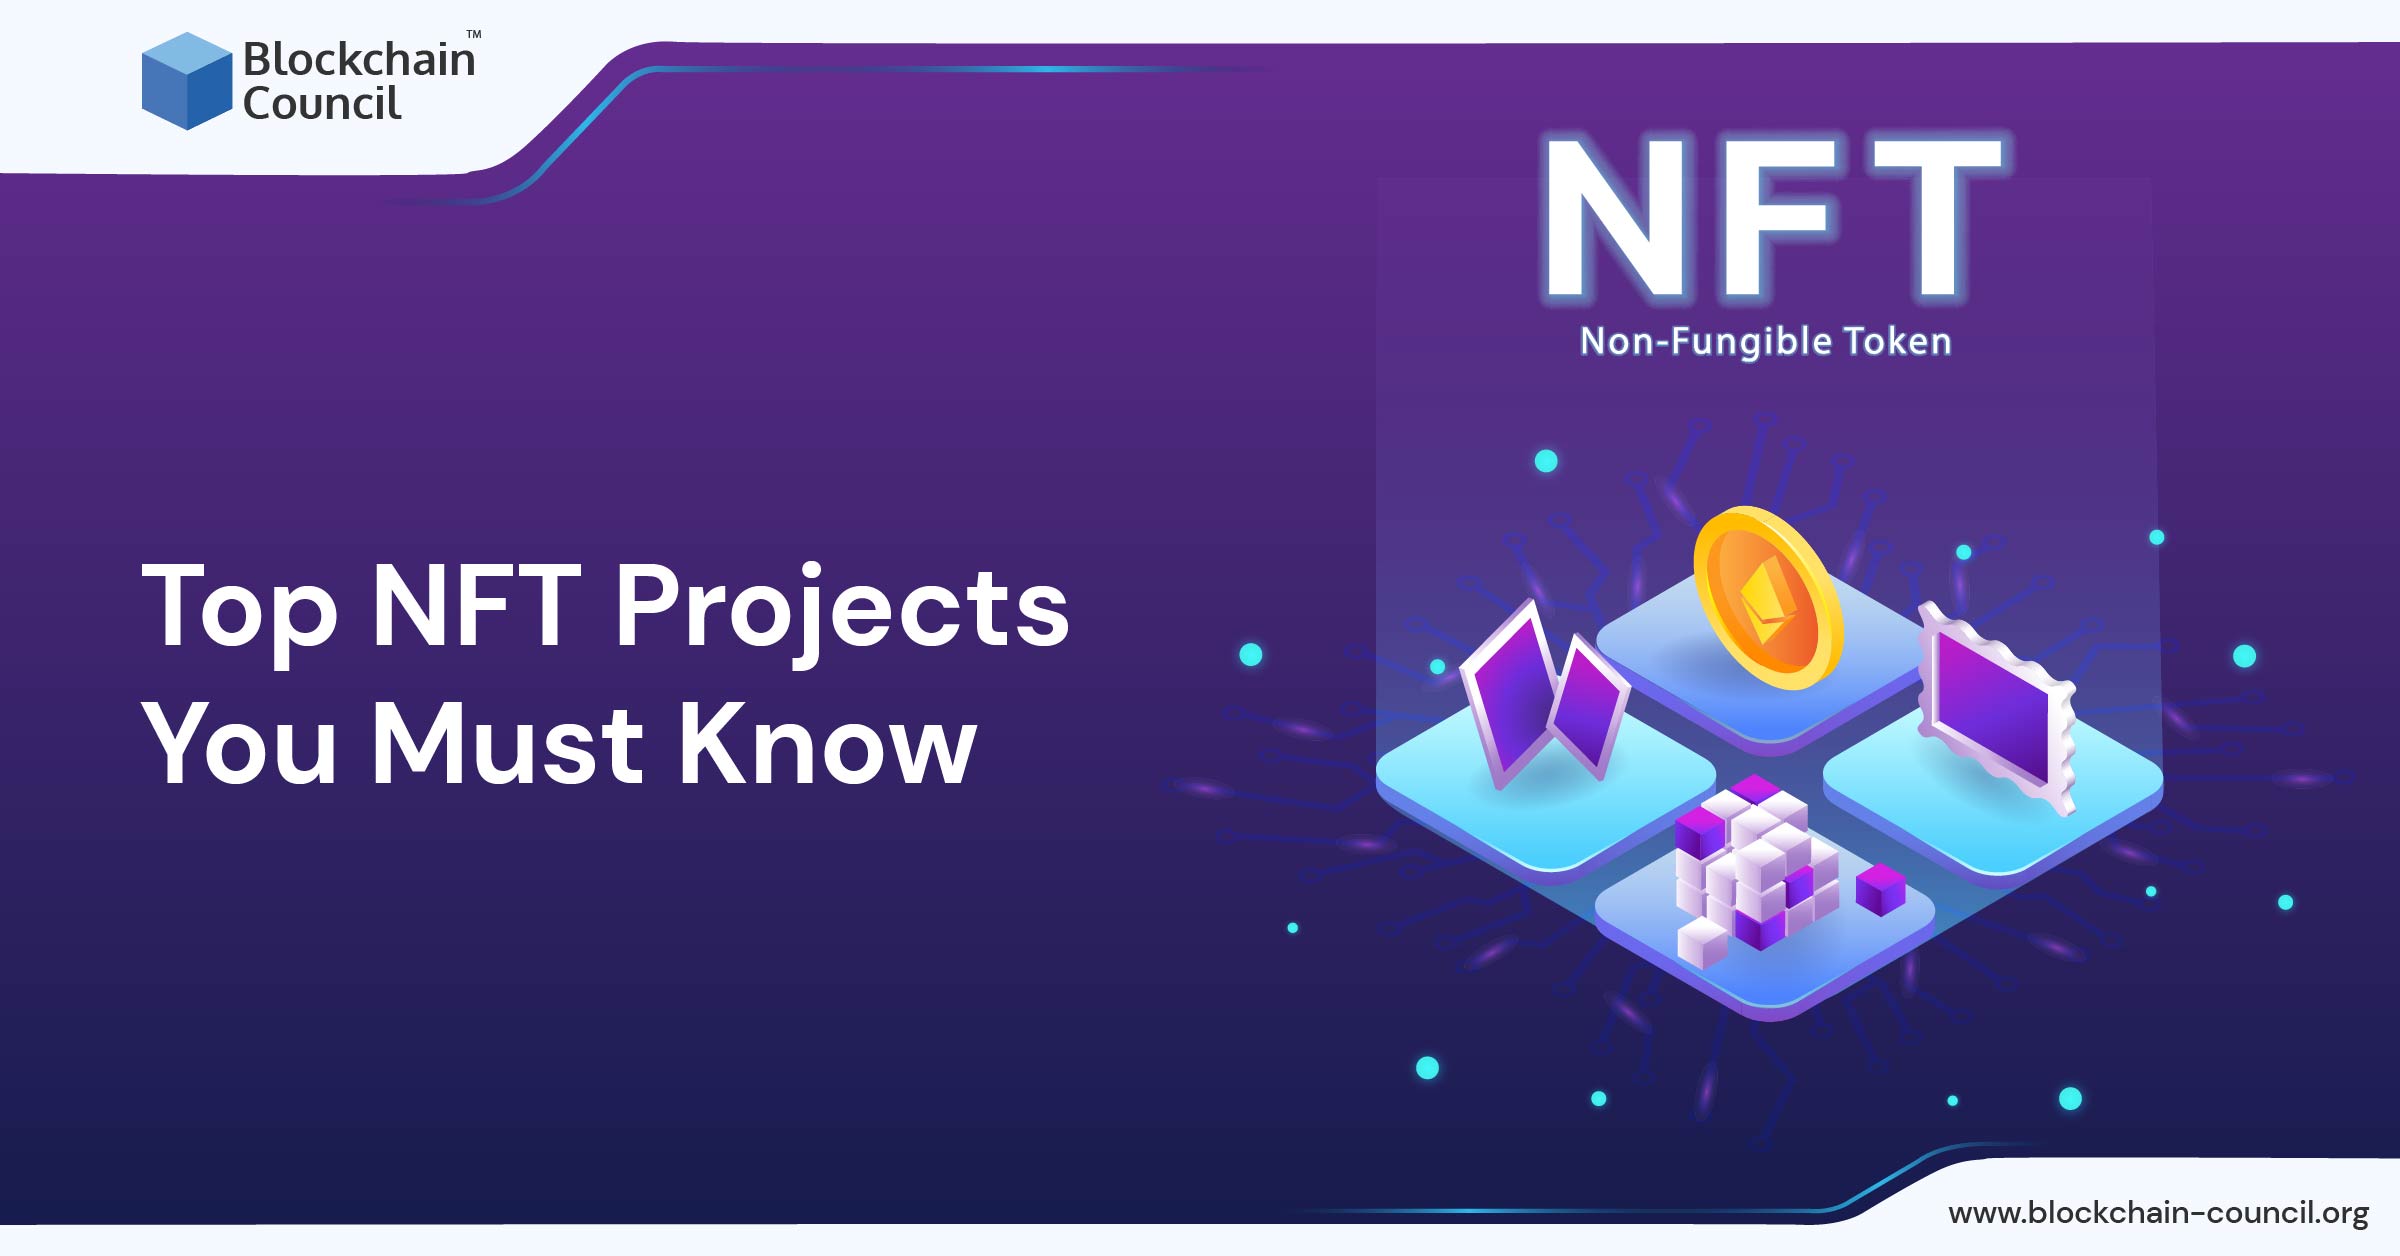 Top NFT Projects You Must Know